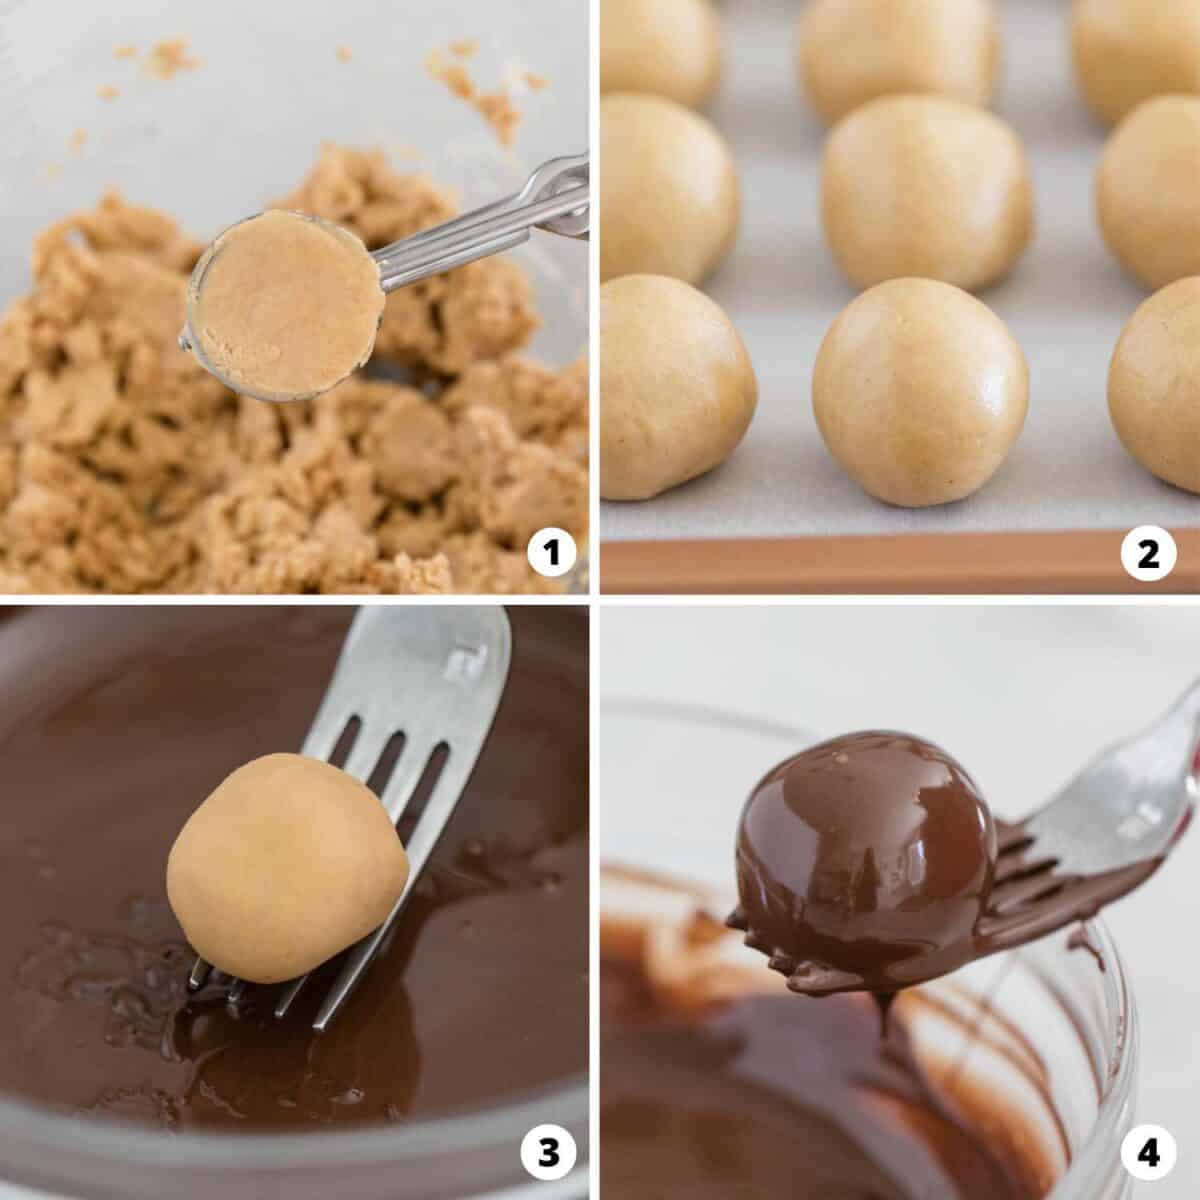 Showing how to make peanut butter balls in a 4 step collage.